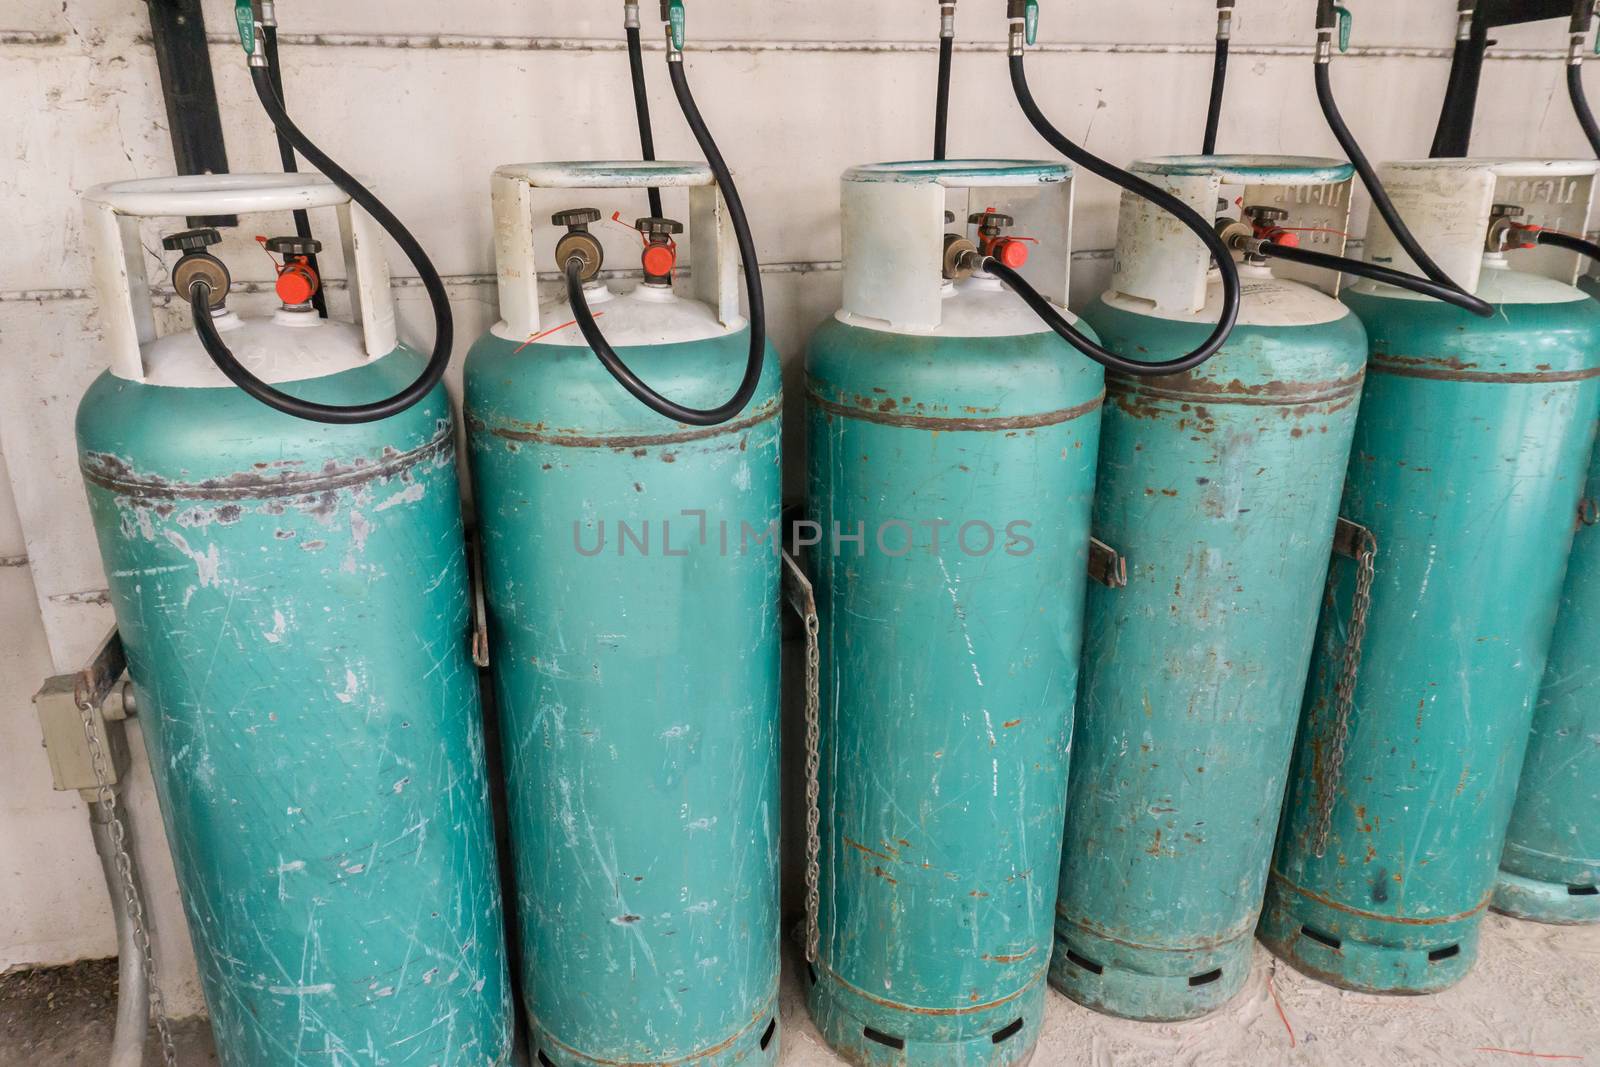 liquefied petroleum gas or LPG by nopparats